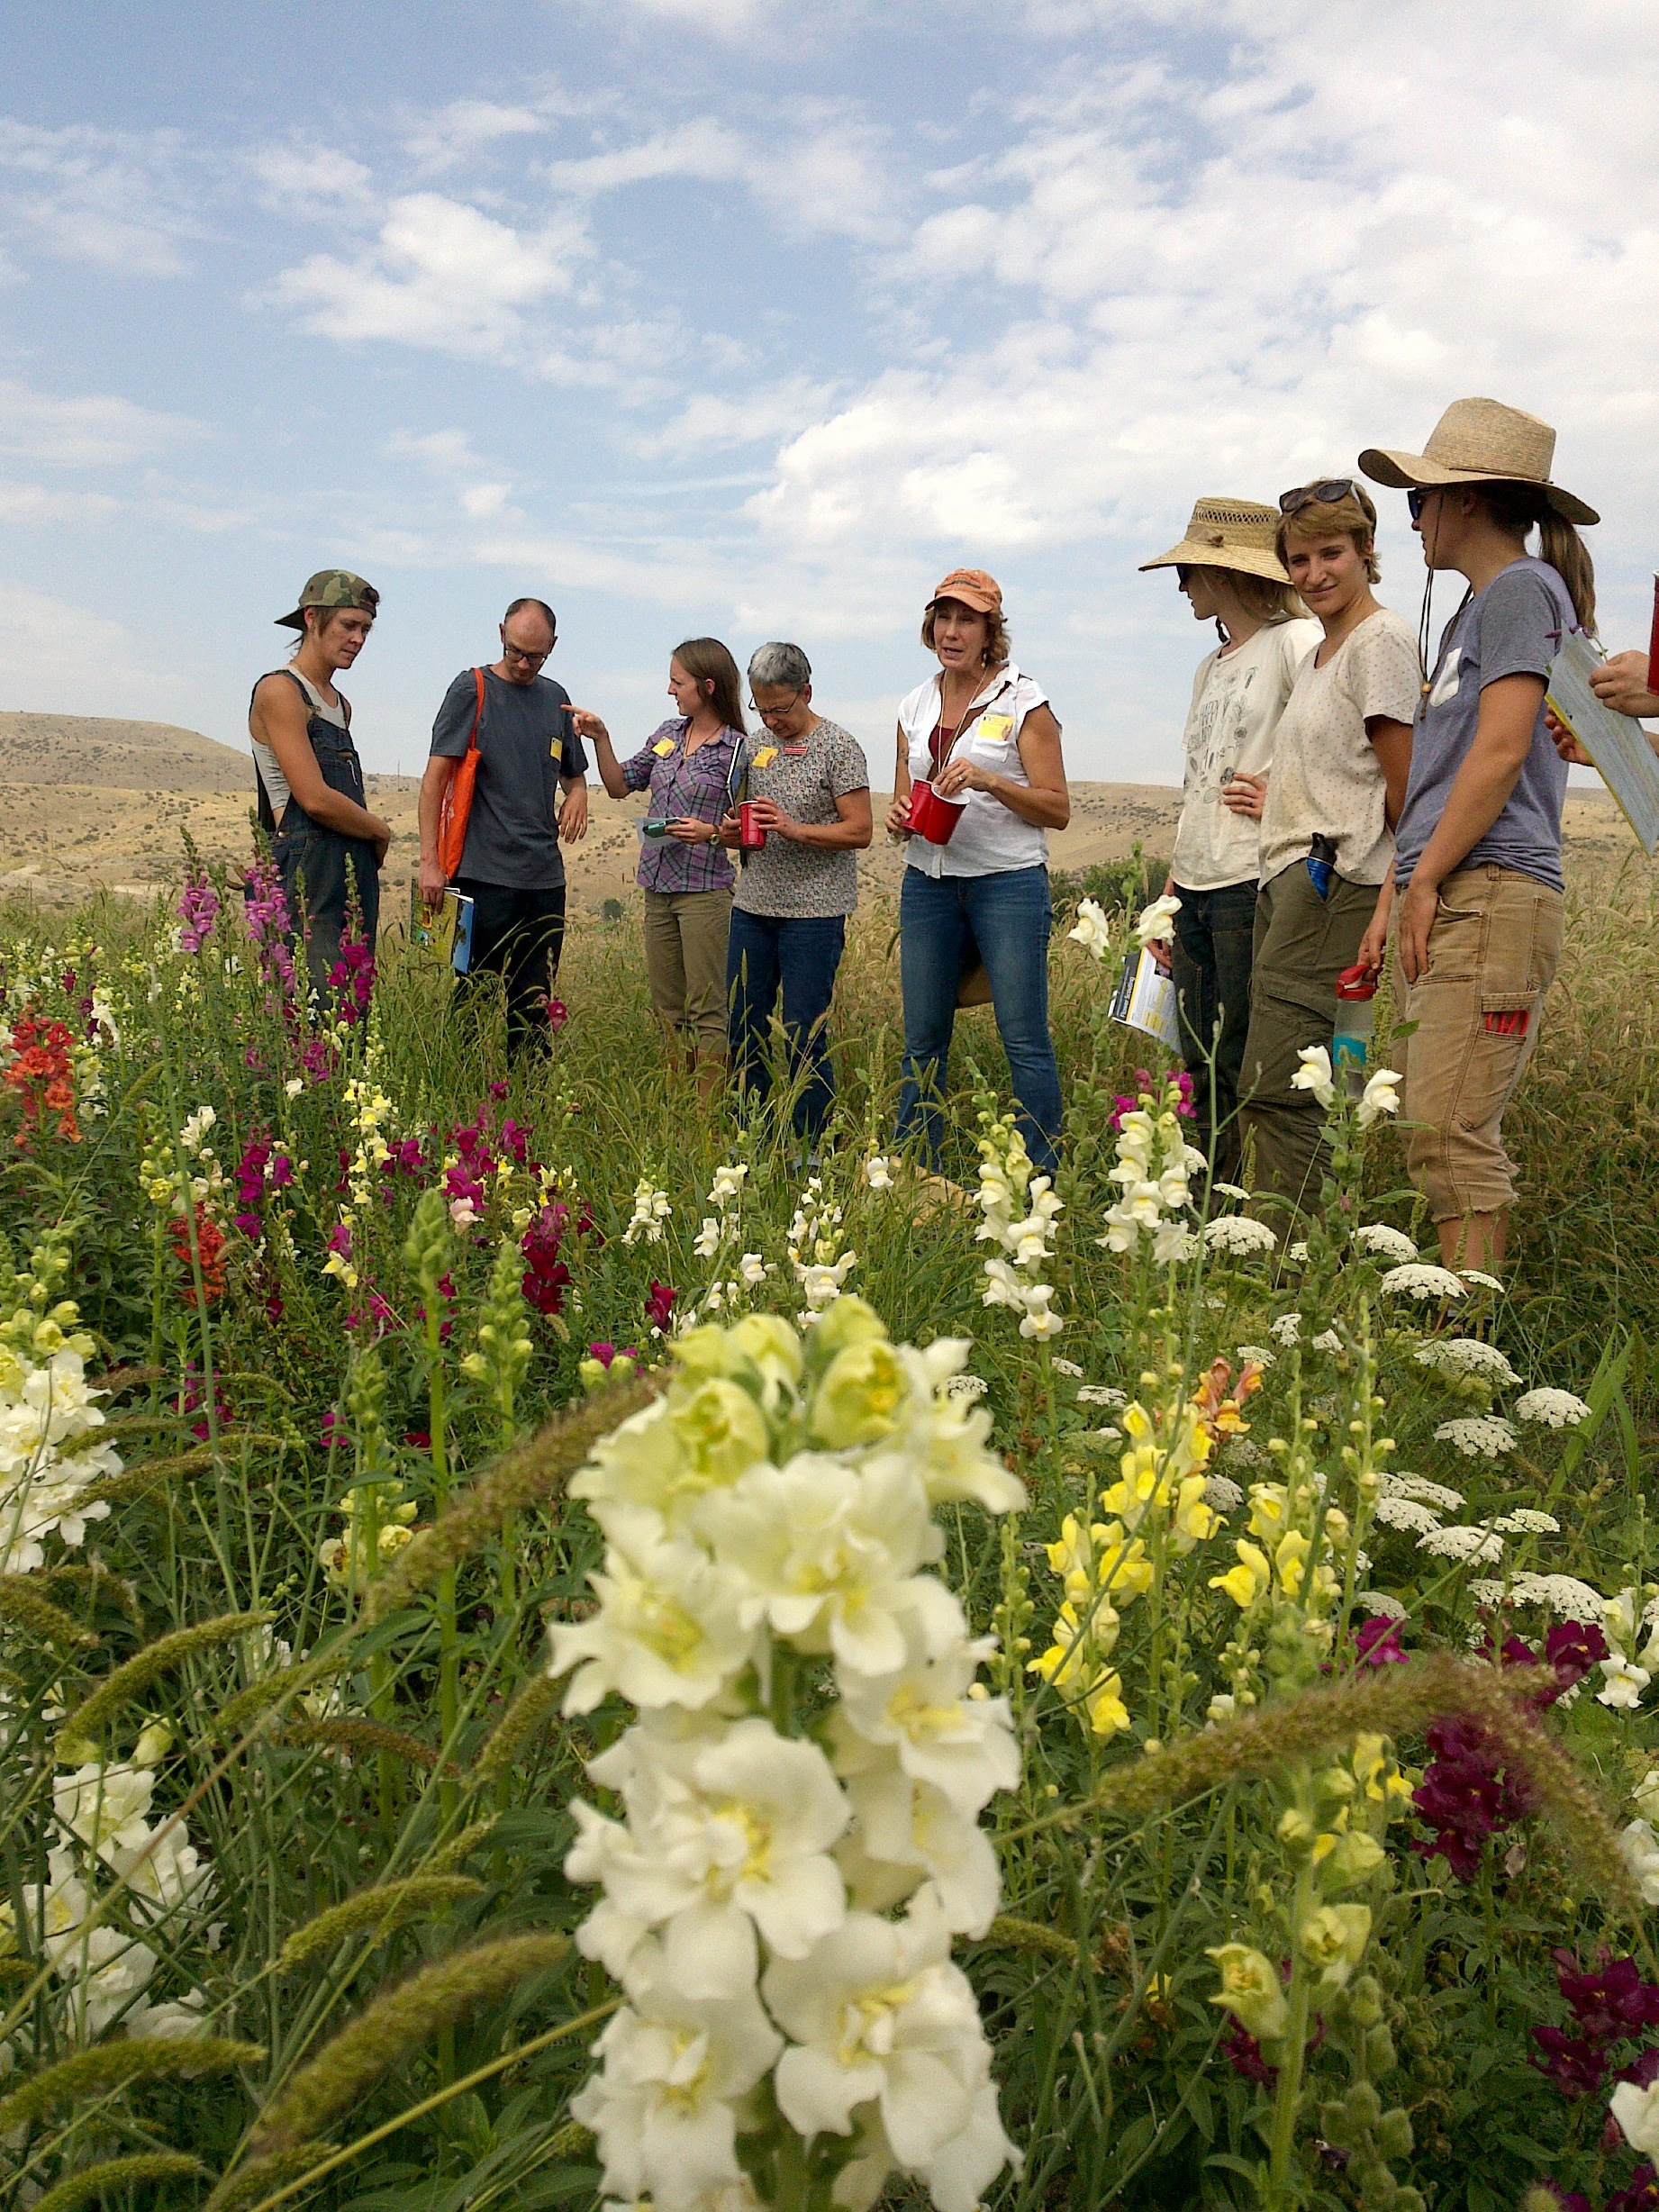 A group of people gathers around a colorful planting of assorted flowers.